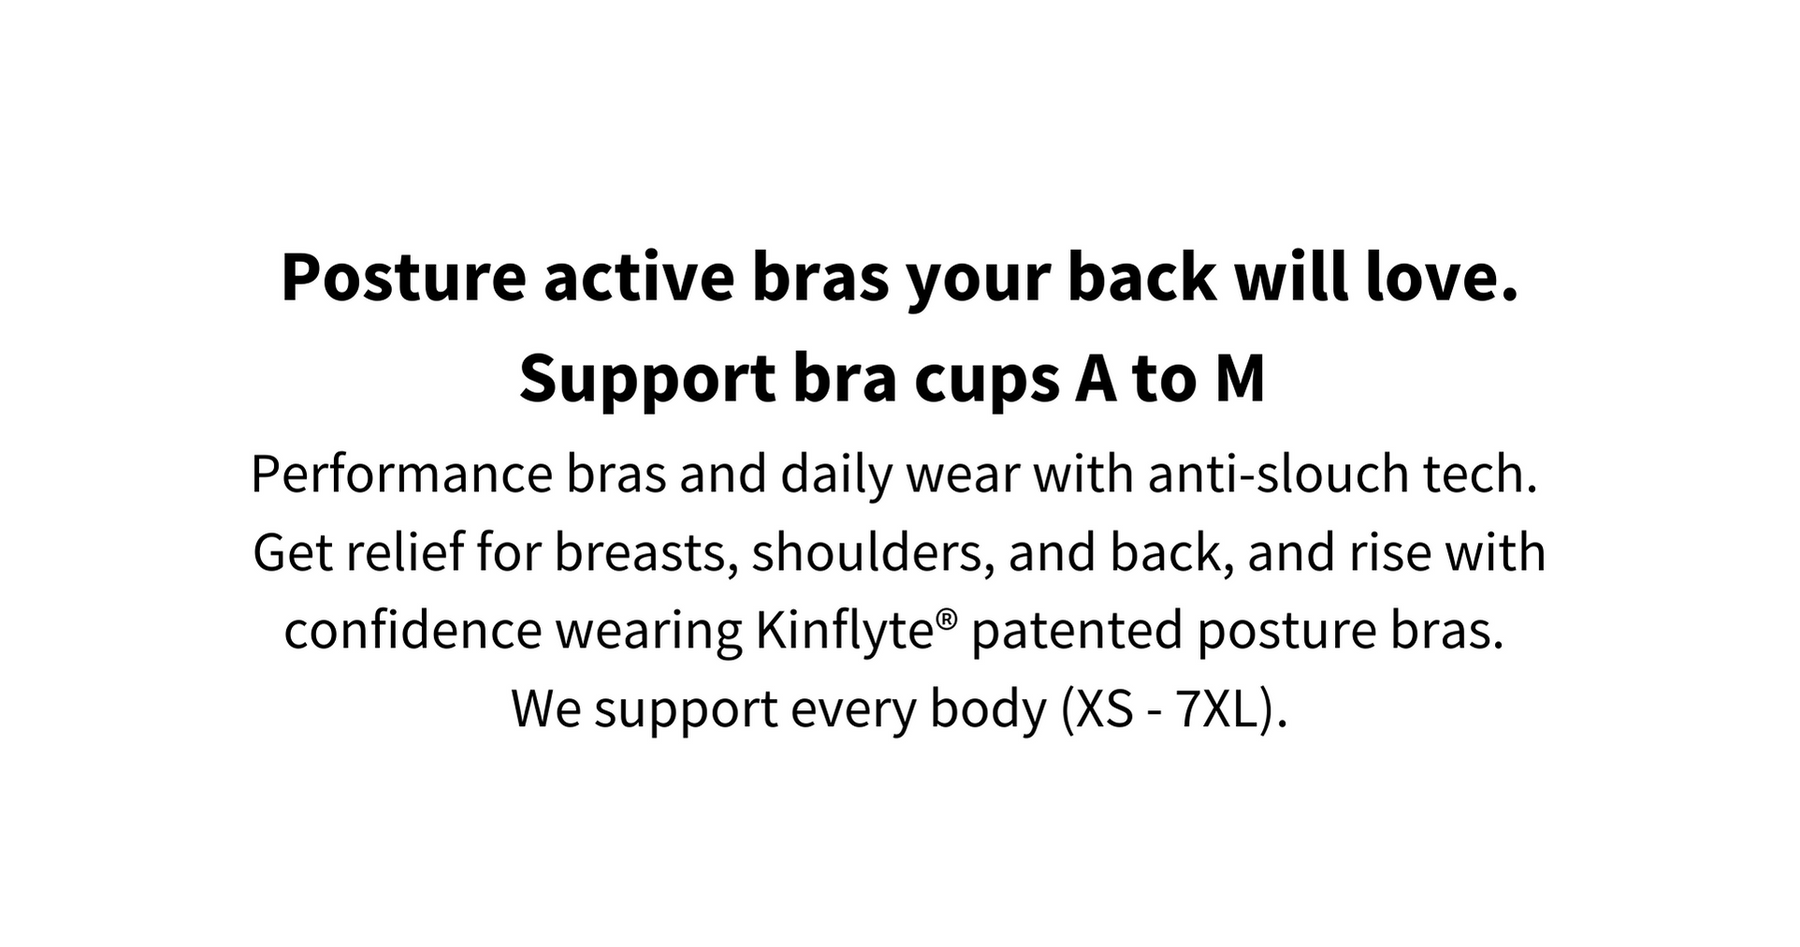 Posture bras your back will love. These patented posture bras support bra cups A to M. Performance bras and daily wear with anti-slouch tech.  Get relief for breasts, shoulders, and back, and rise with confidence wearing Kinflyte® patented posture bras.  We support every body (XS - 7XL).